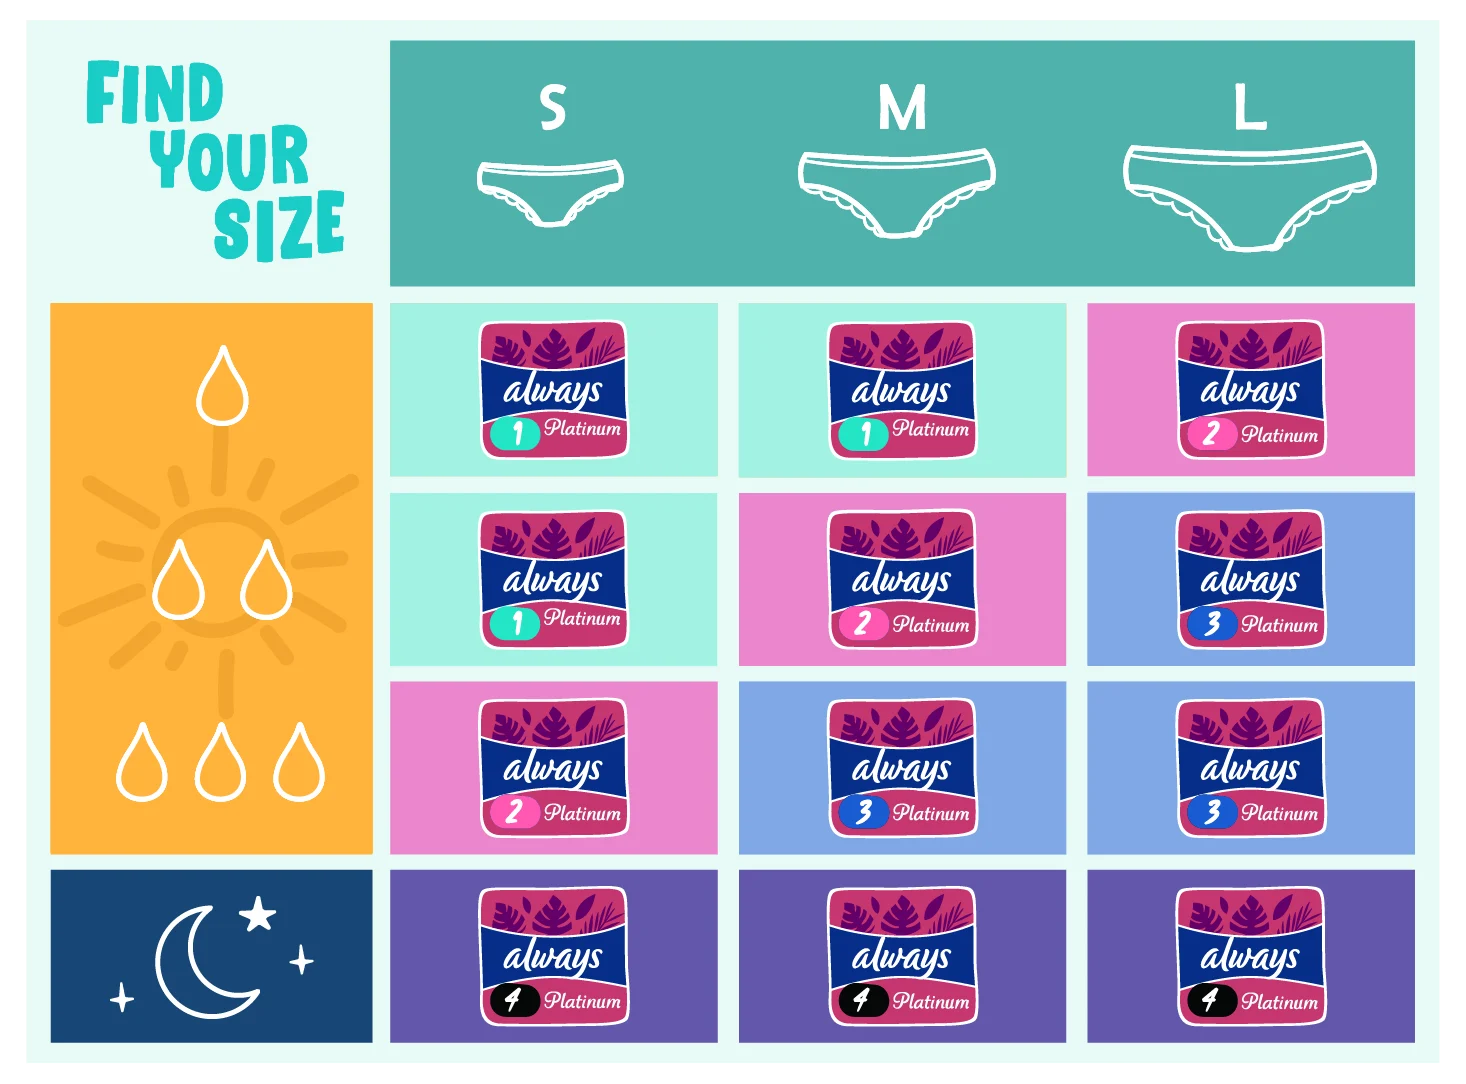 Find Your Fit product size chart